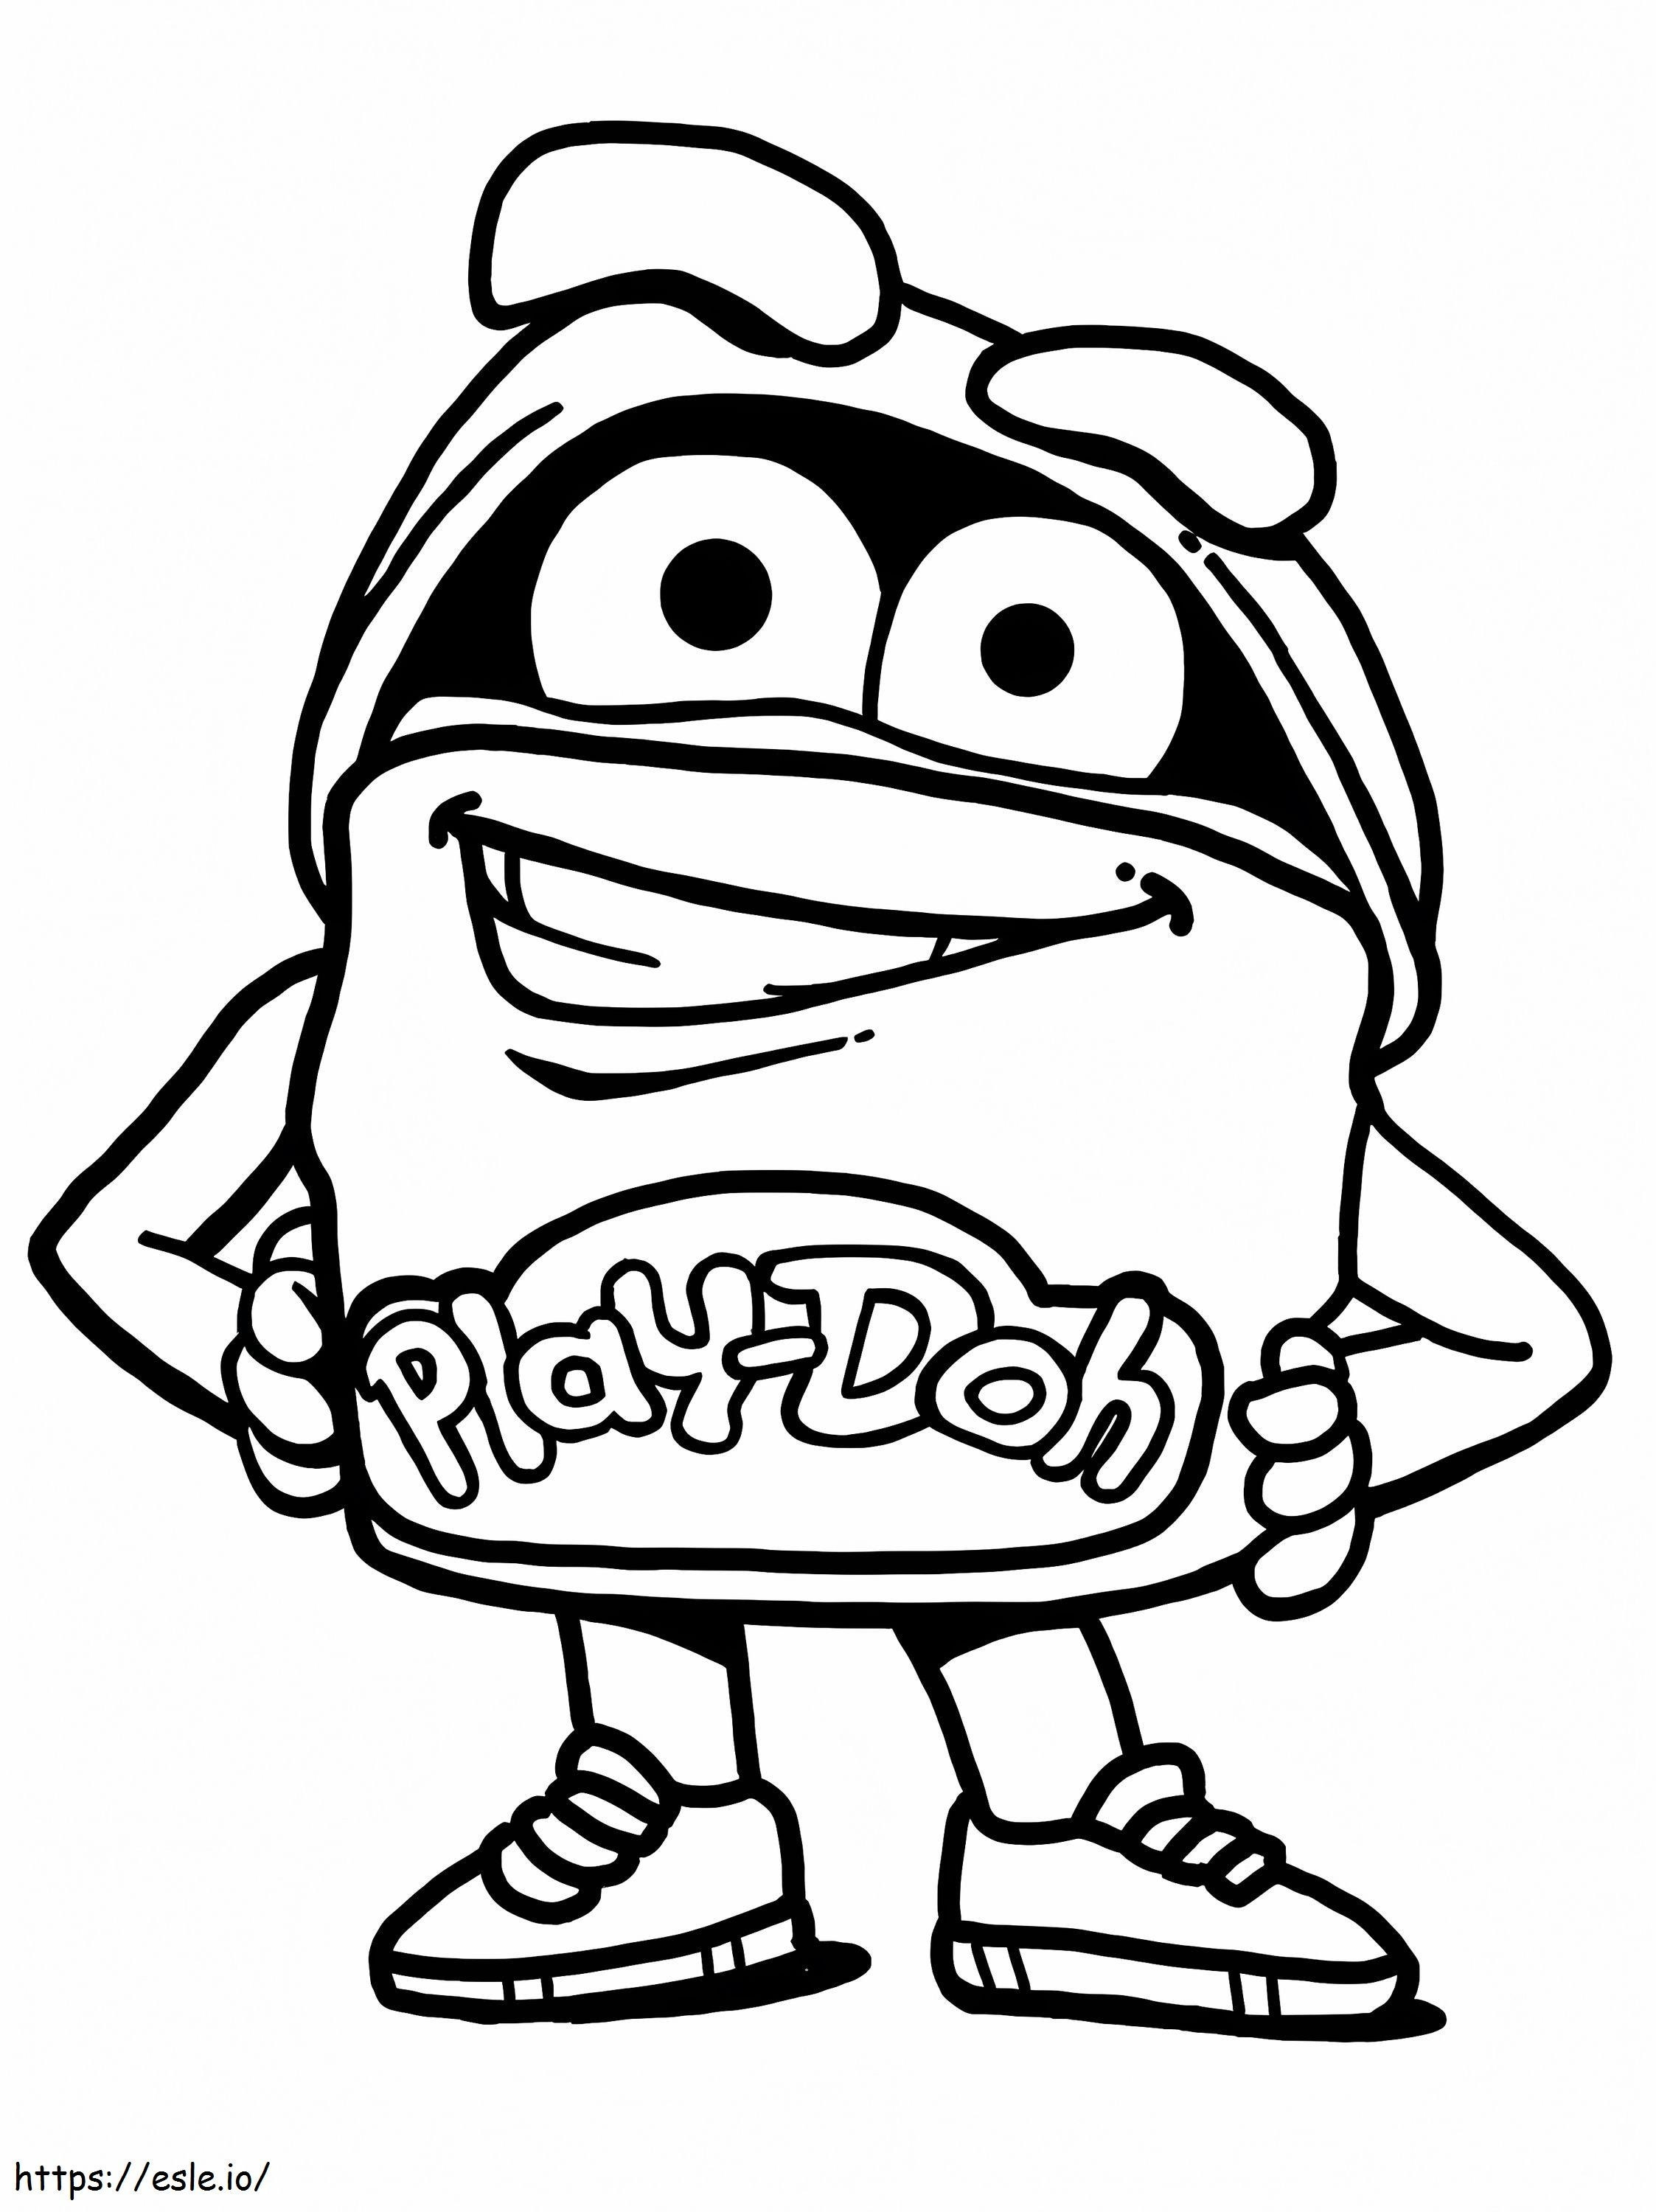 Play Doh 3 coloring page